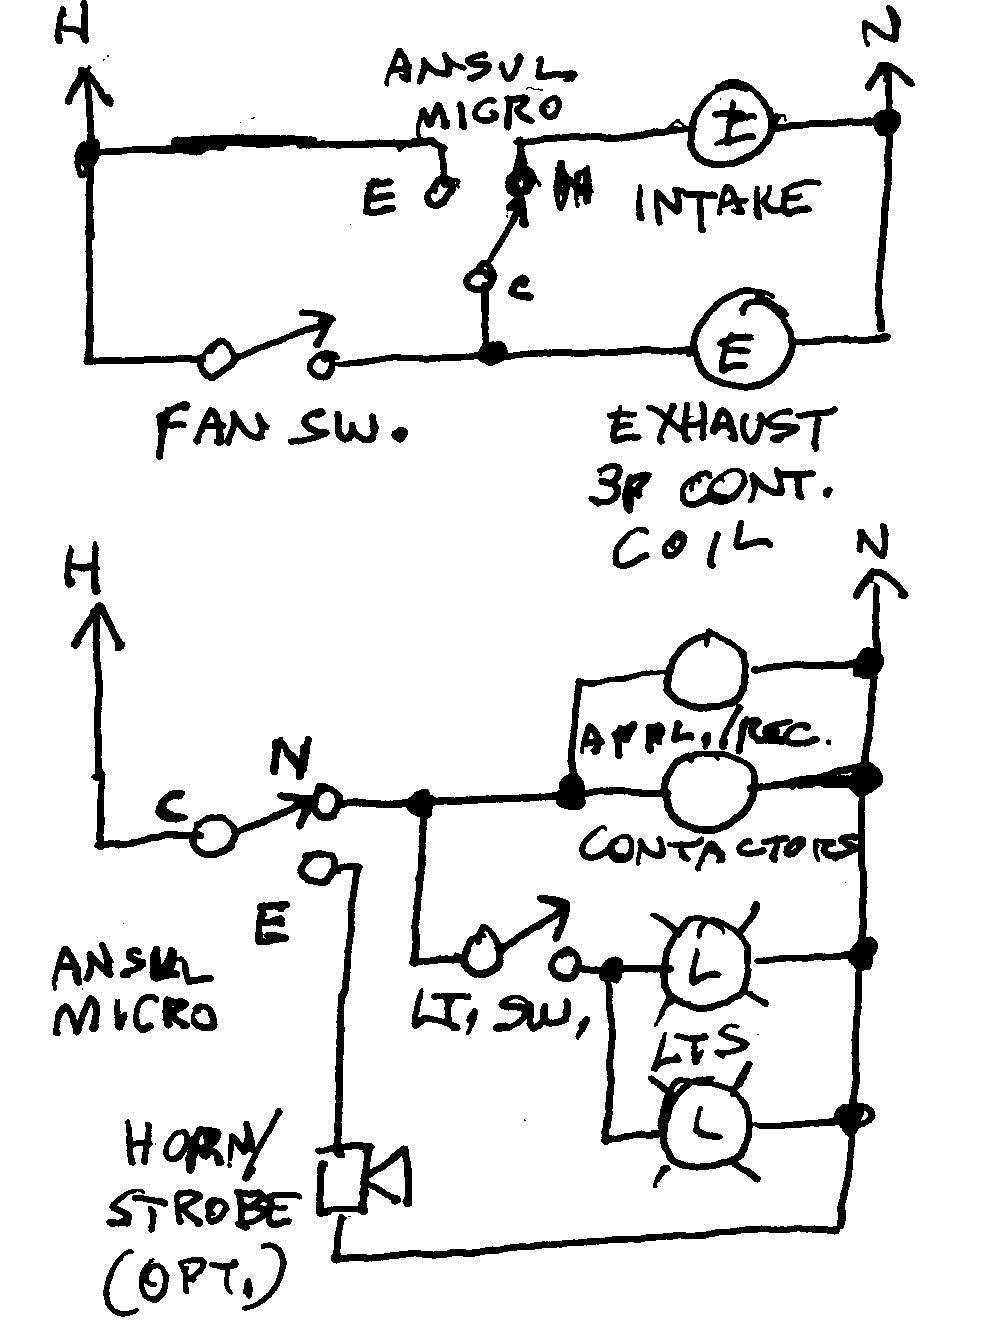 epo with two smoke detectors and shunt trip breaker wiring diagram